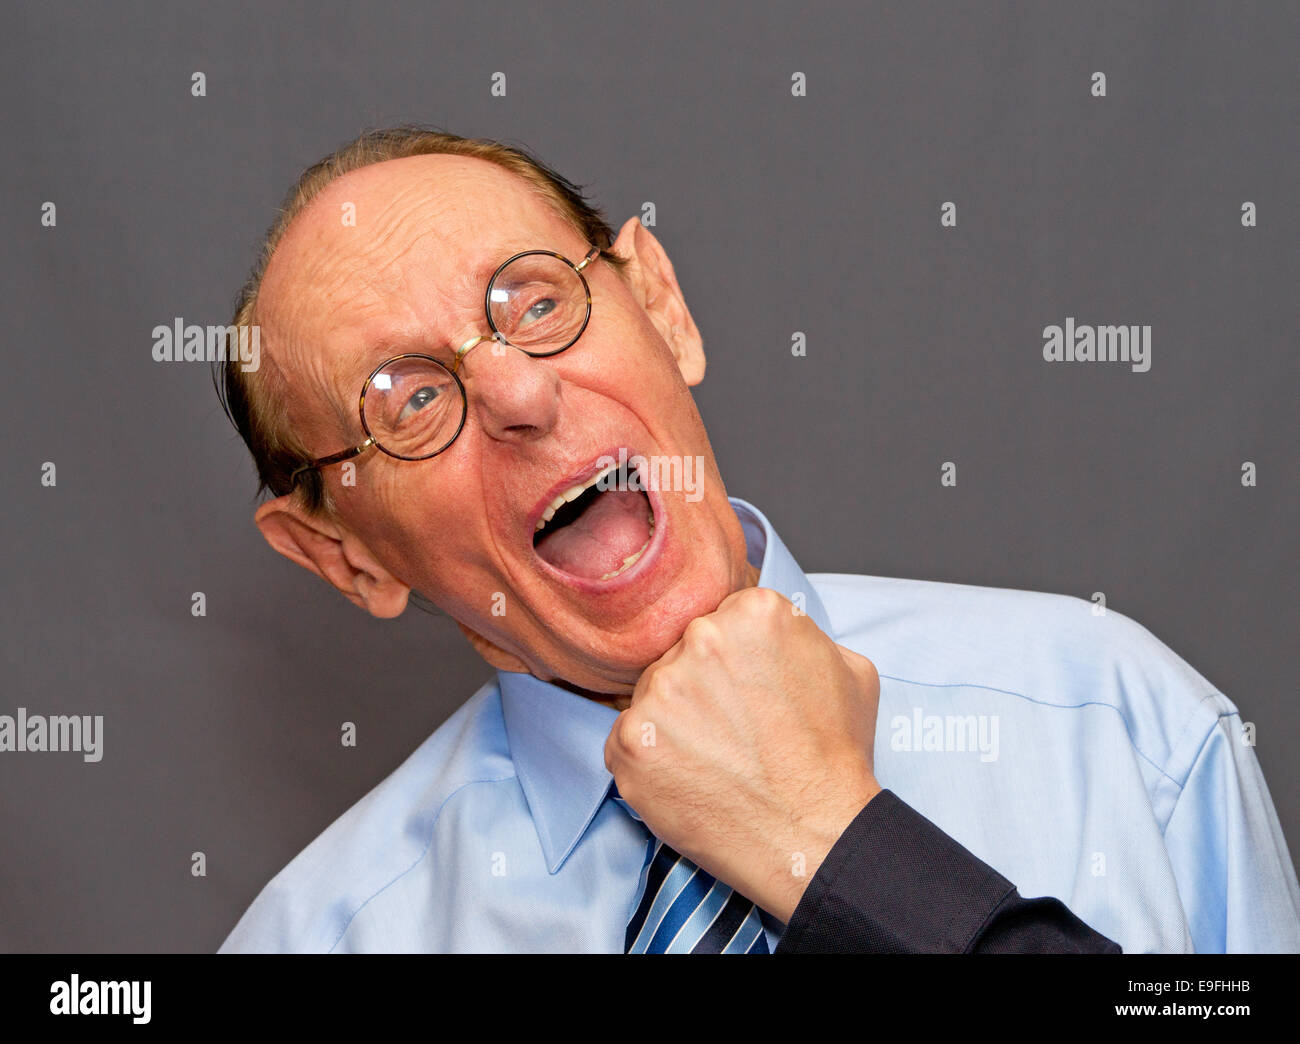 Knock out ! Stock Photo